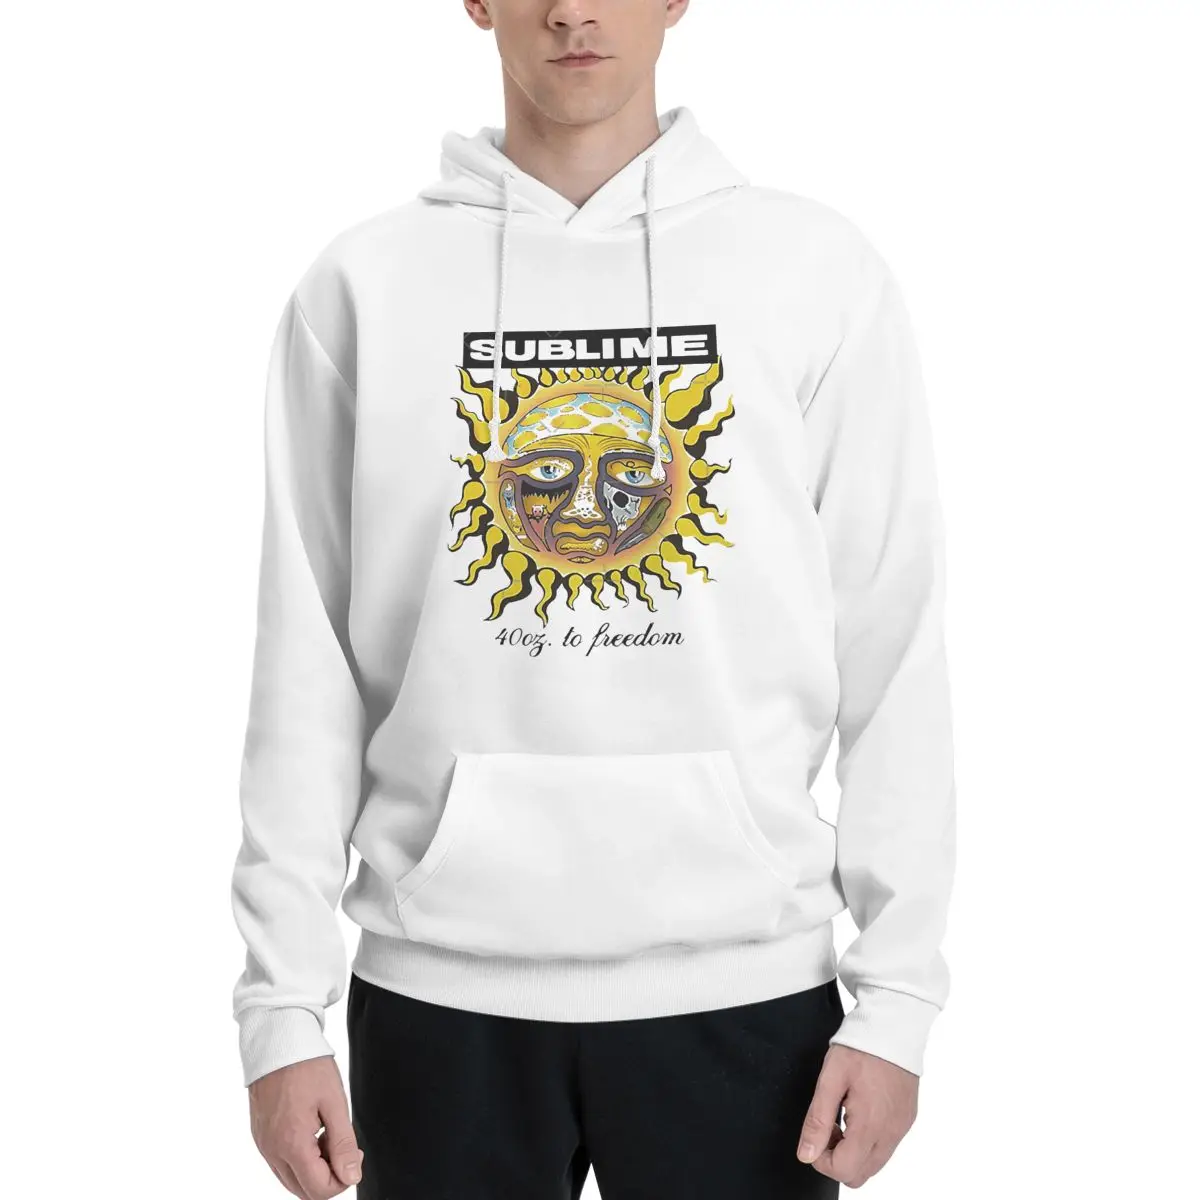 

Sublime Band New Sun Concert Album 2 Couples Plus Velvet Hooded Sweater Top Quality With hood Hoodie Activity competition sexy